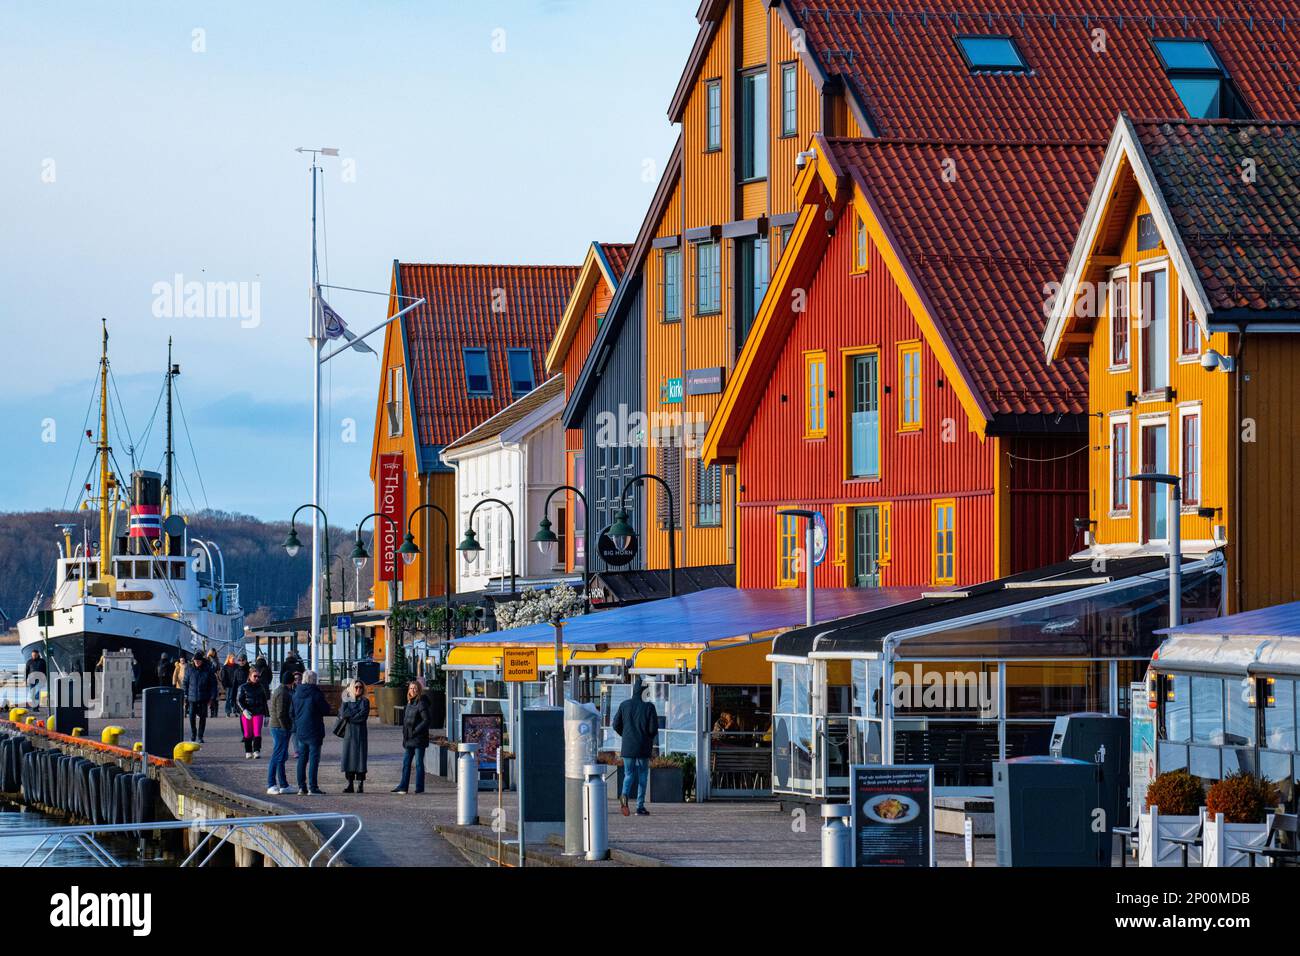 Bars and restaurants on the waterfront in Tonsberg, Norway. Stock Photo